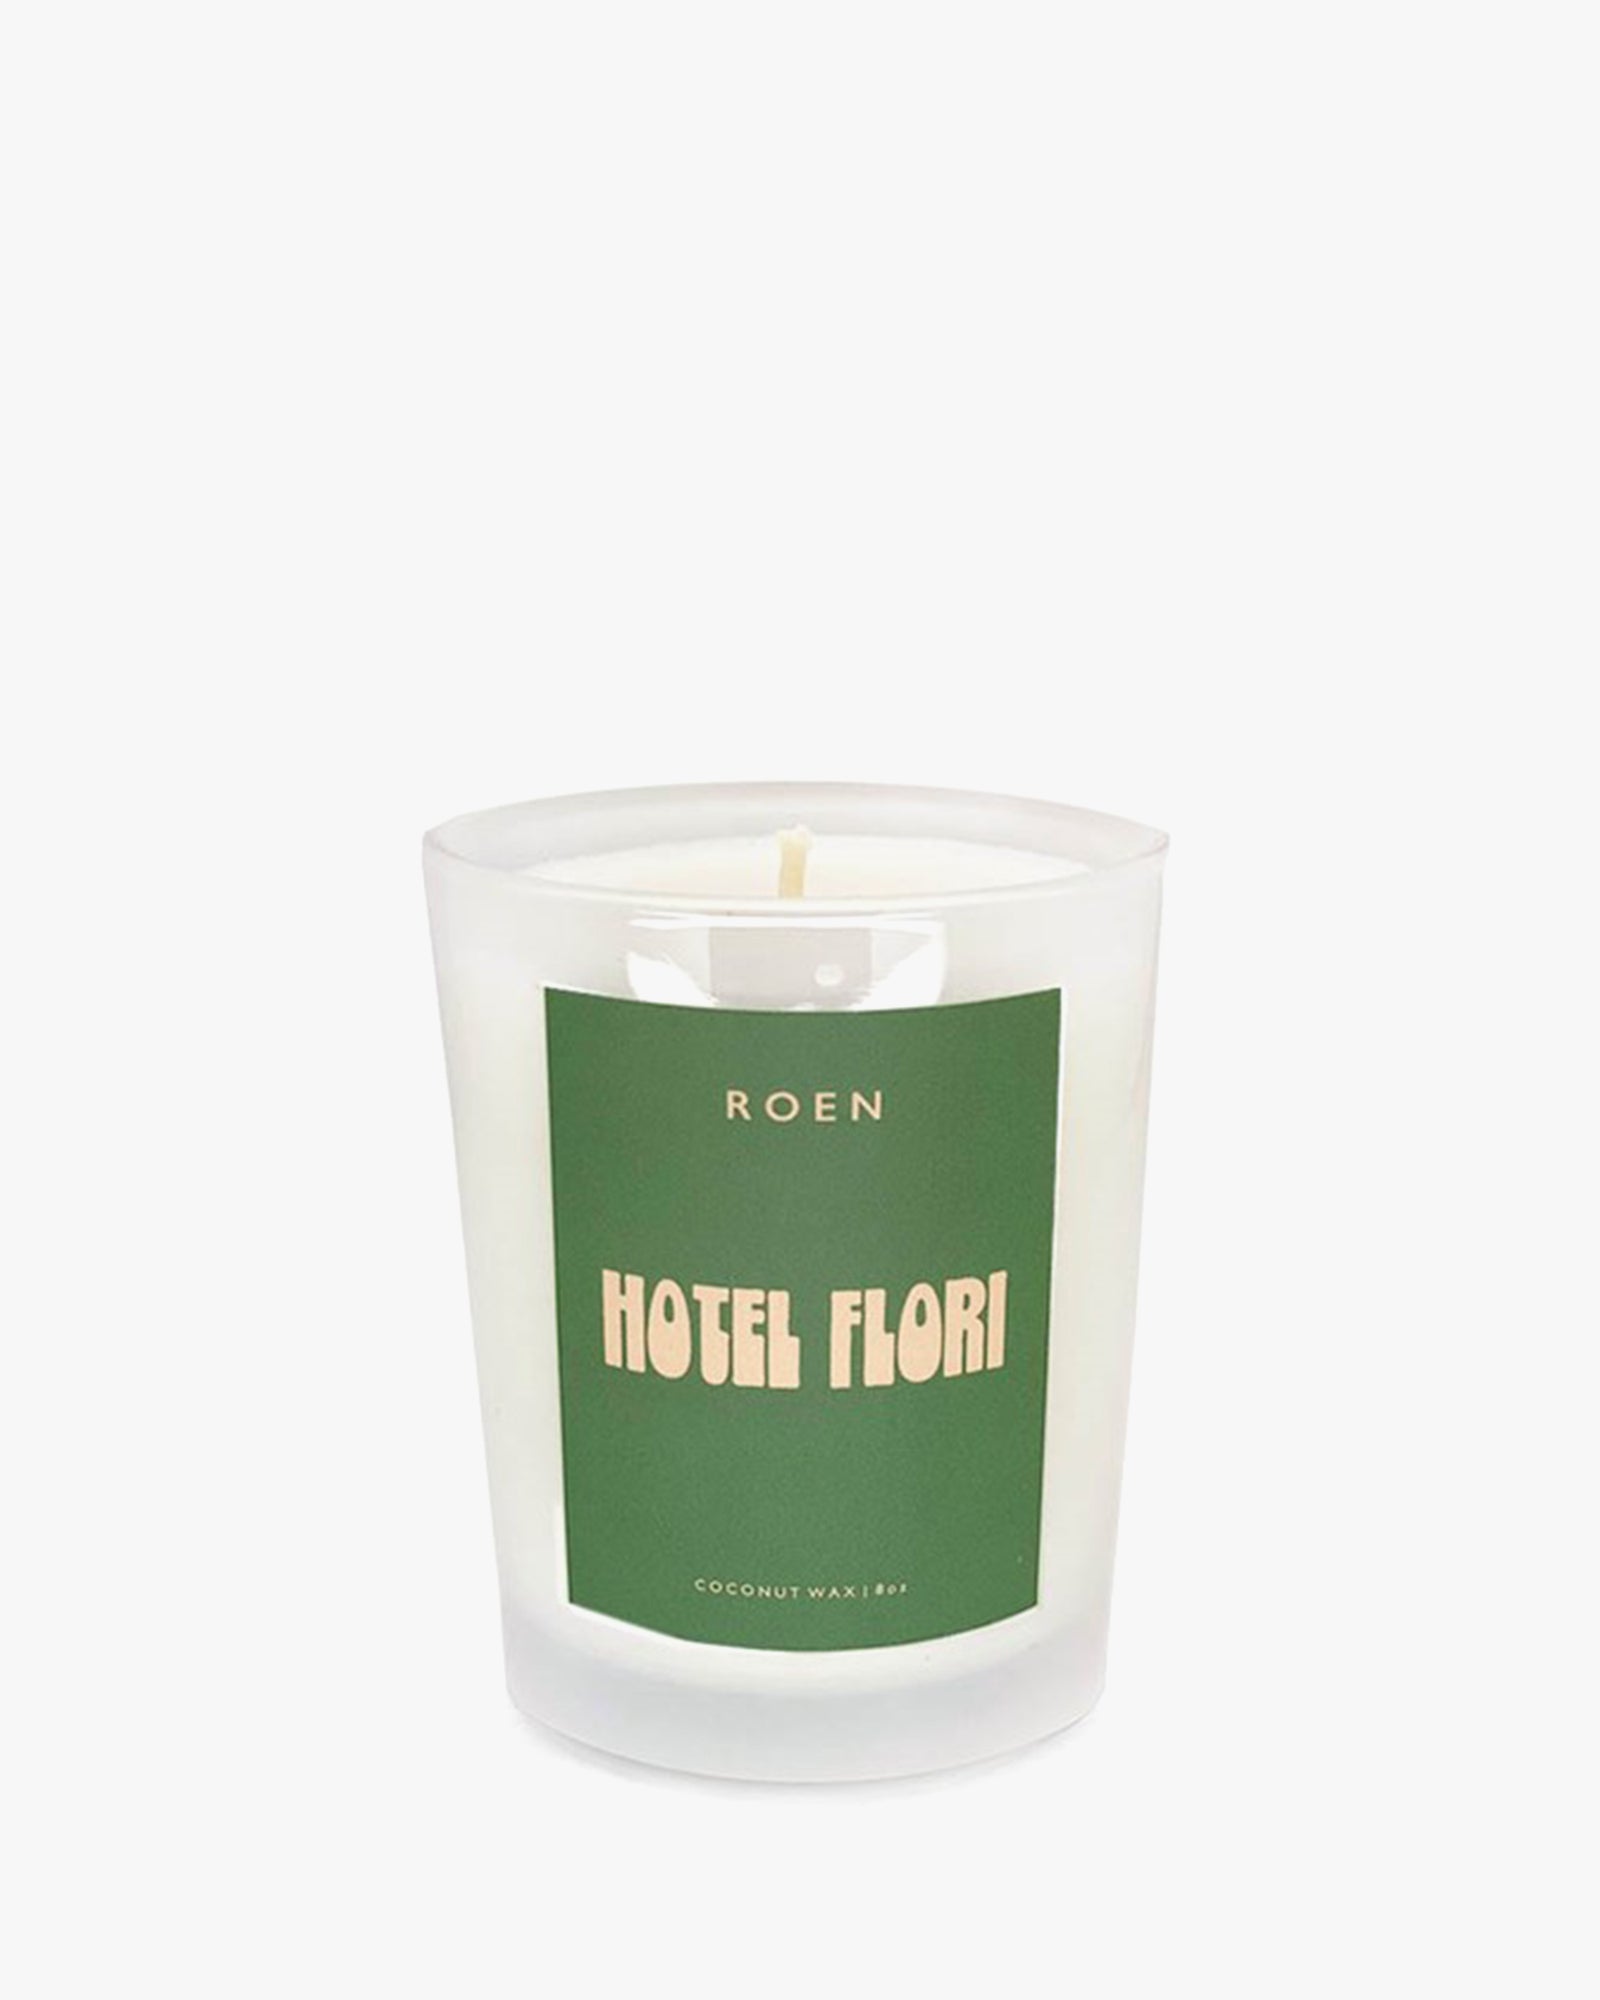 Roen Candle in the scent Hotel Flori